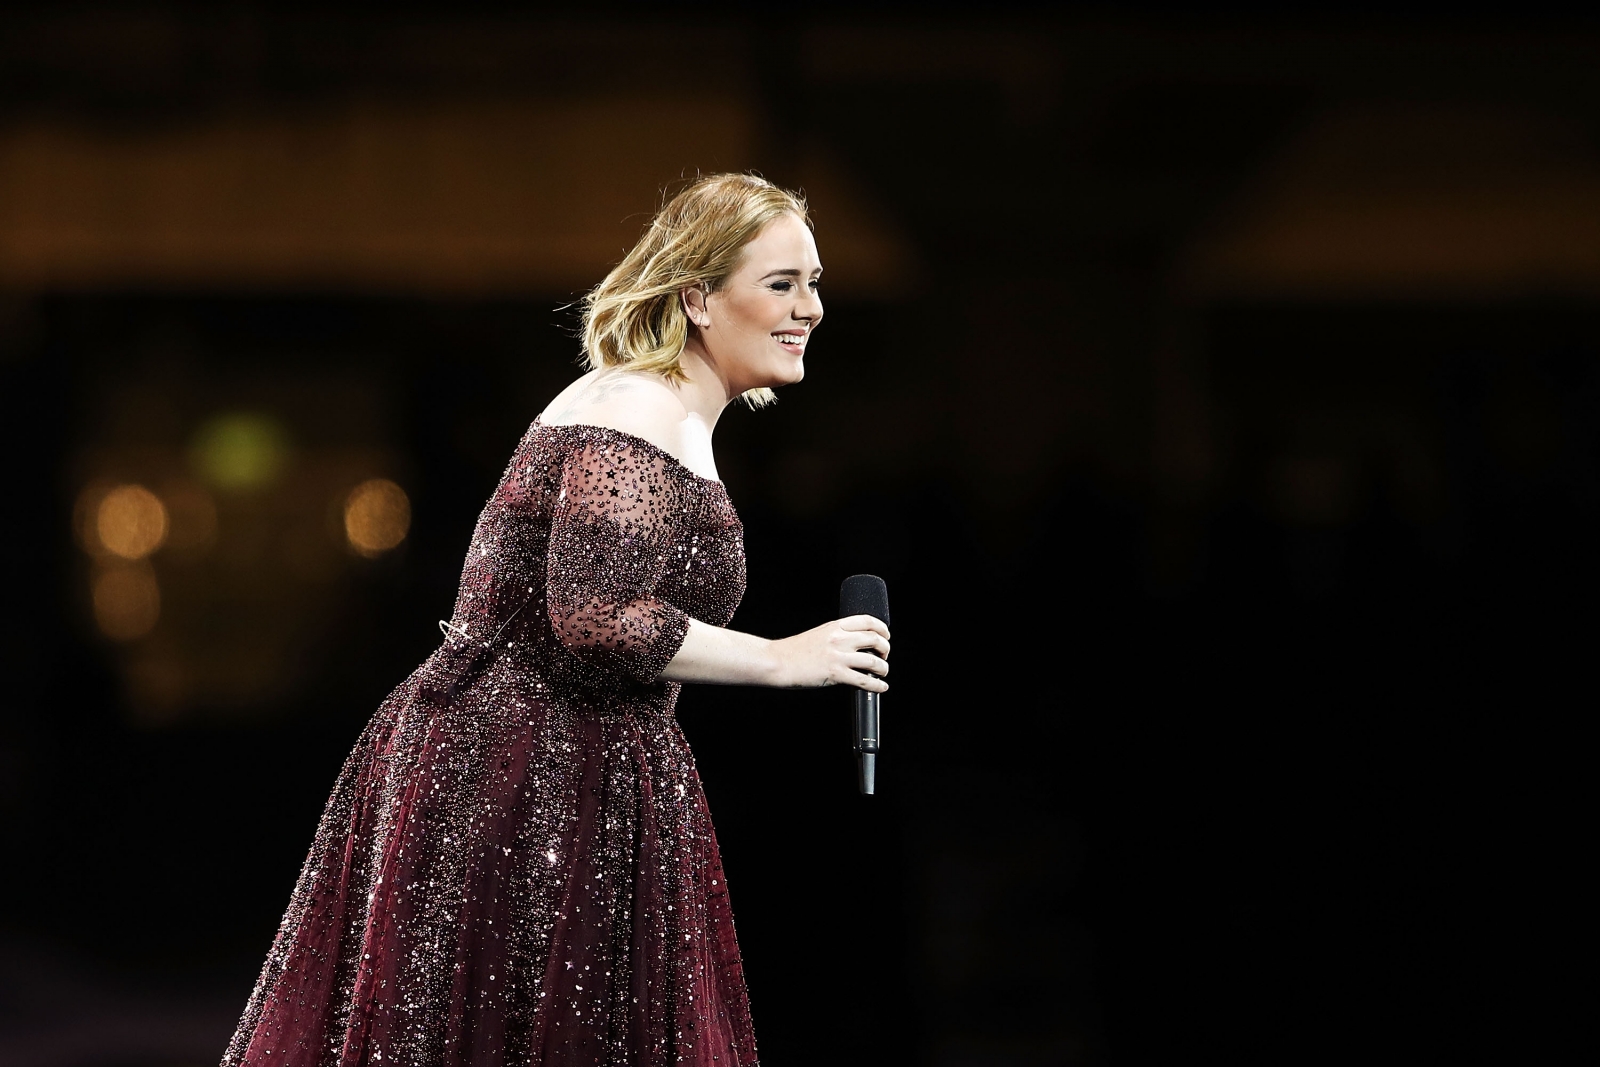 Adele's concert in Adelaide halted by power cut – so singer entertains fans with ...